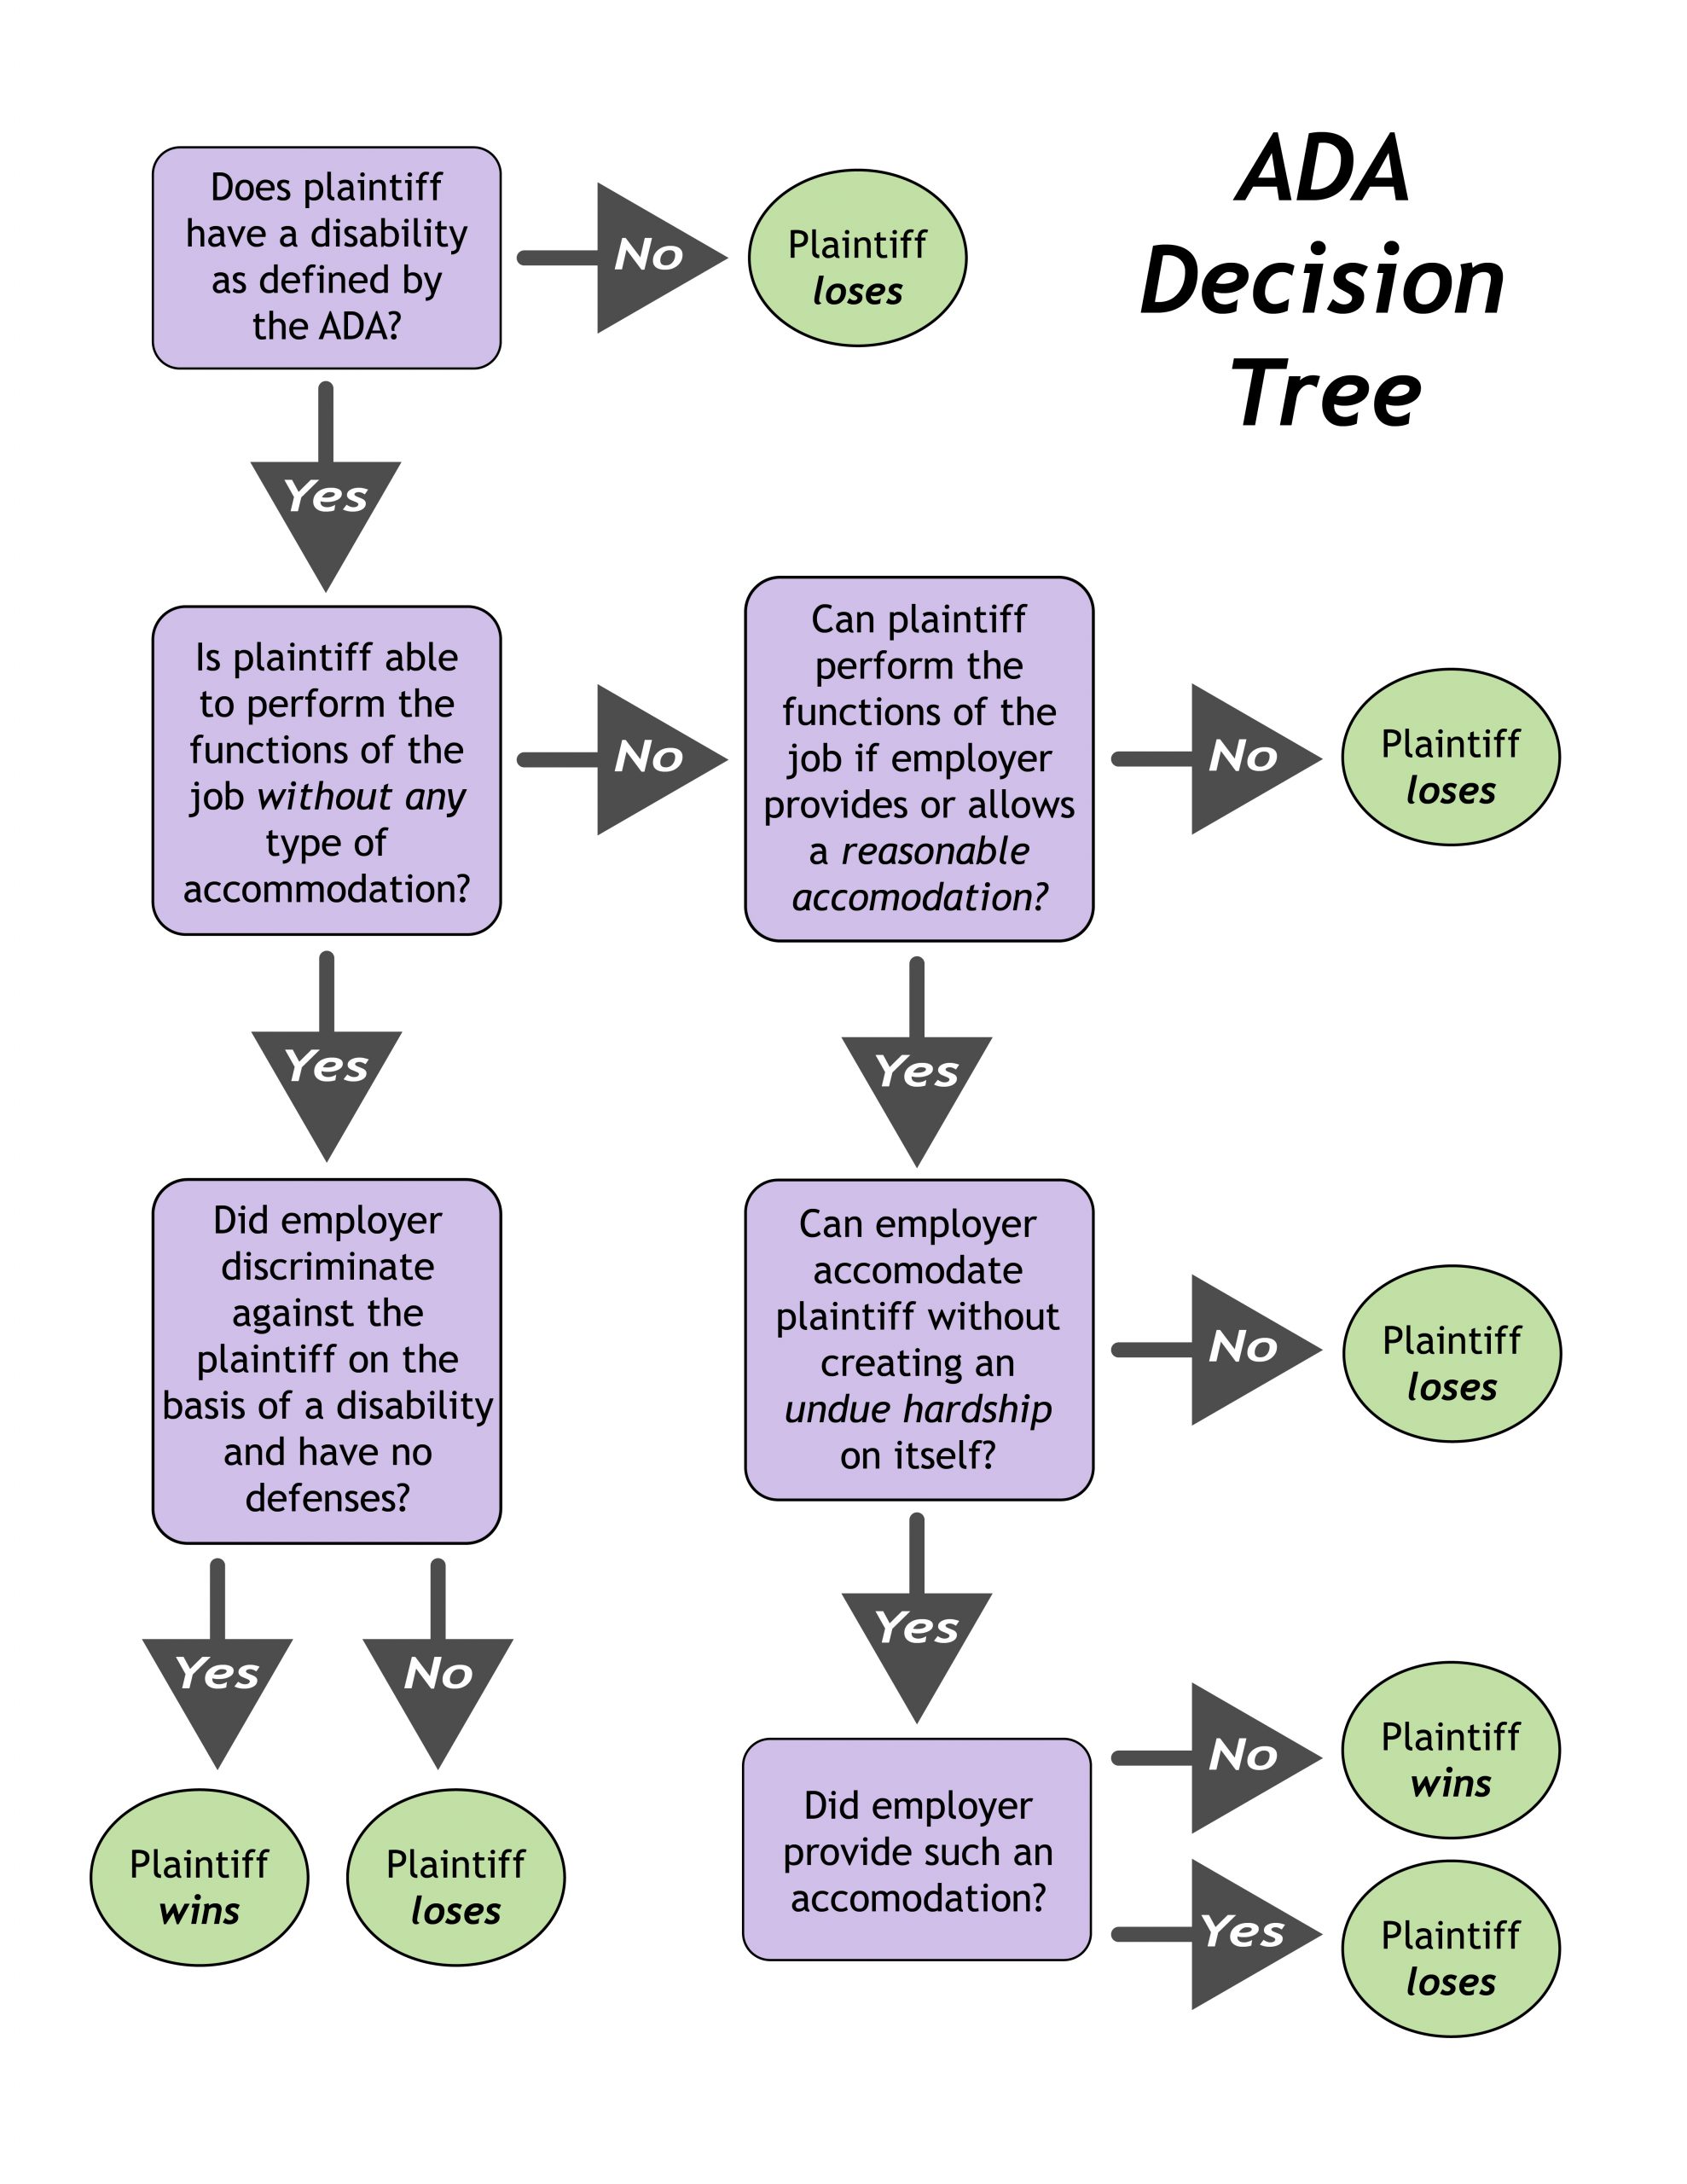 Decision Tree Flowchart under the American Disabilities Act